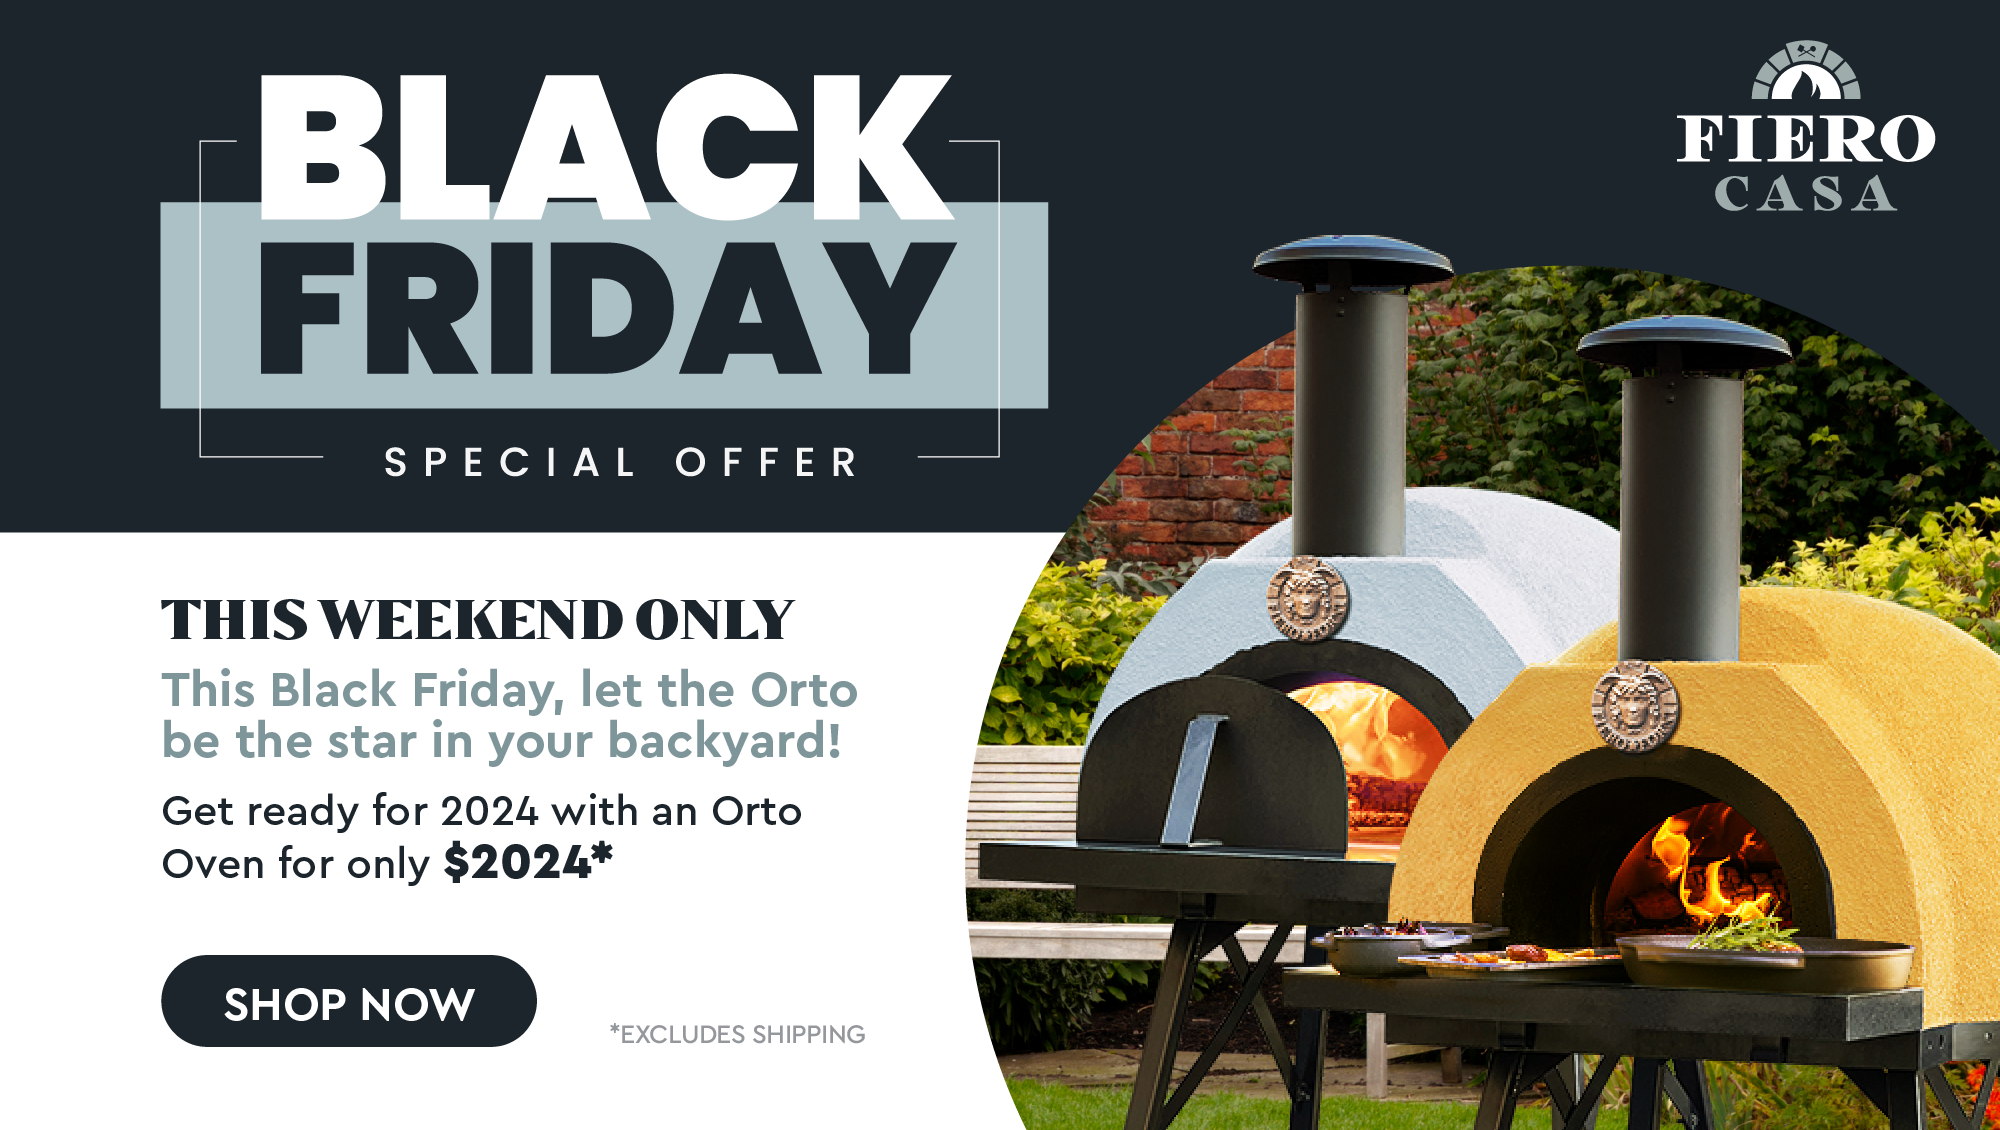 Black Friday Special Offer - Orto Oven On Sale for $2024 Buy Now